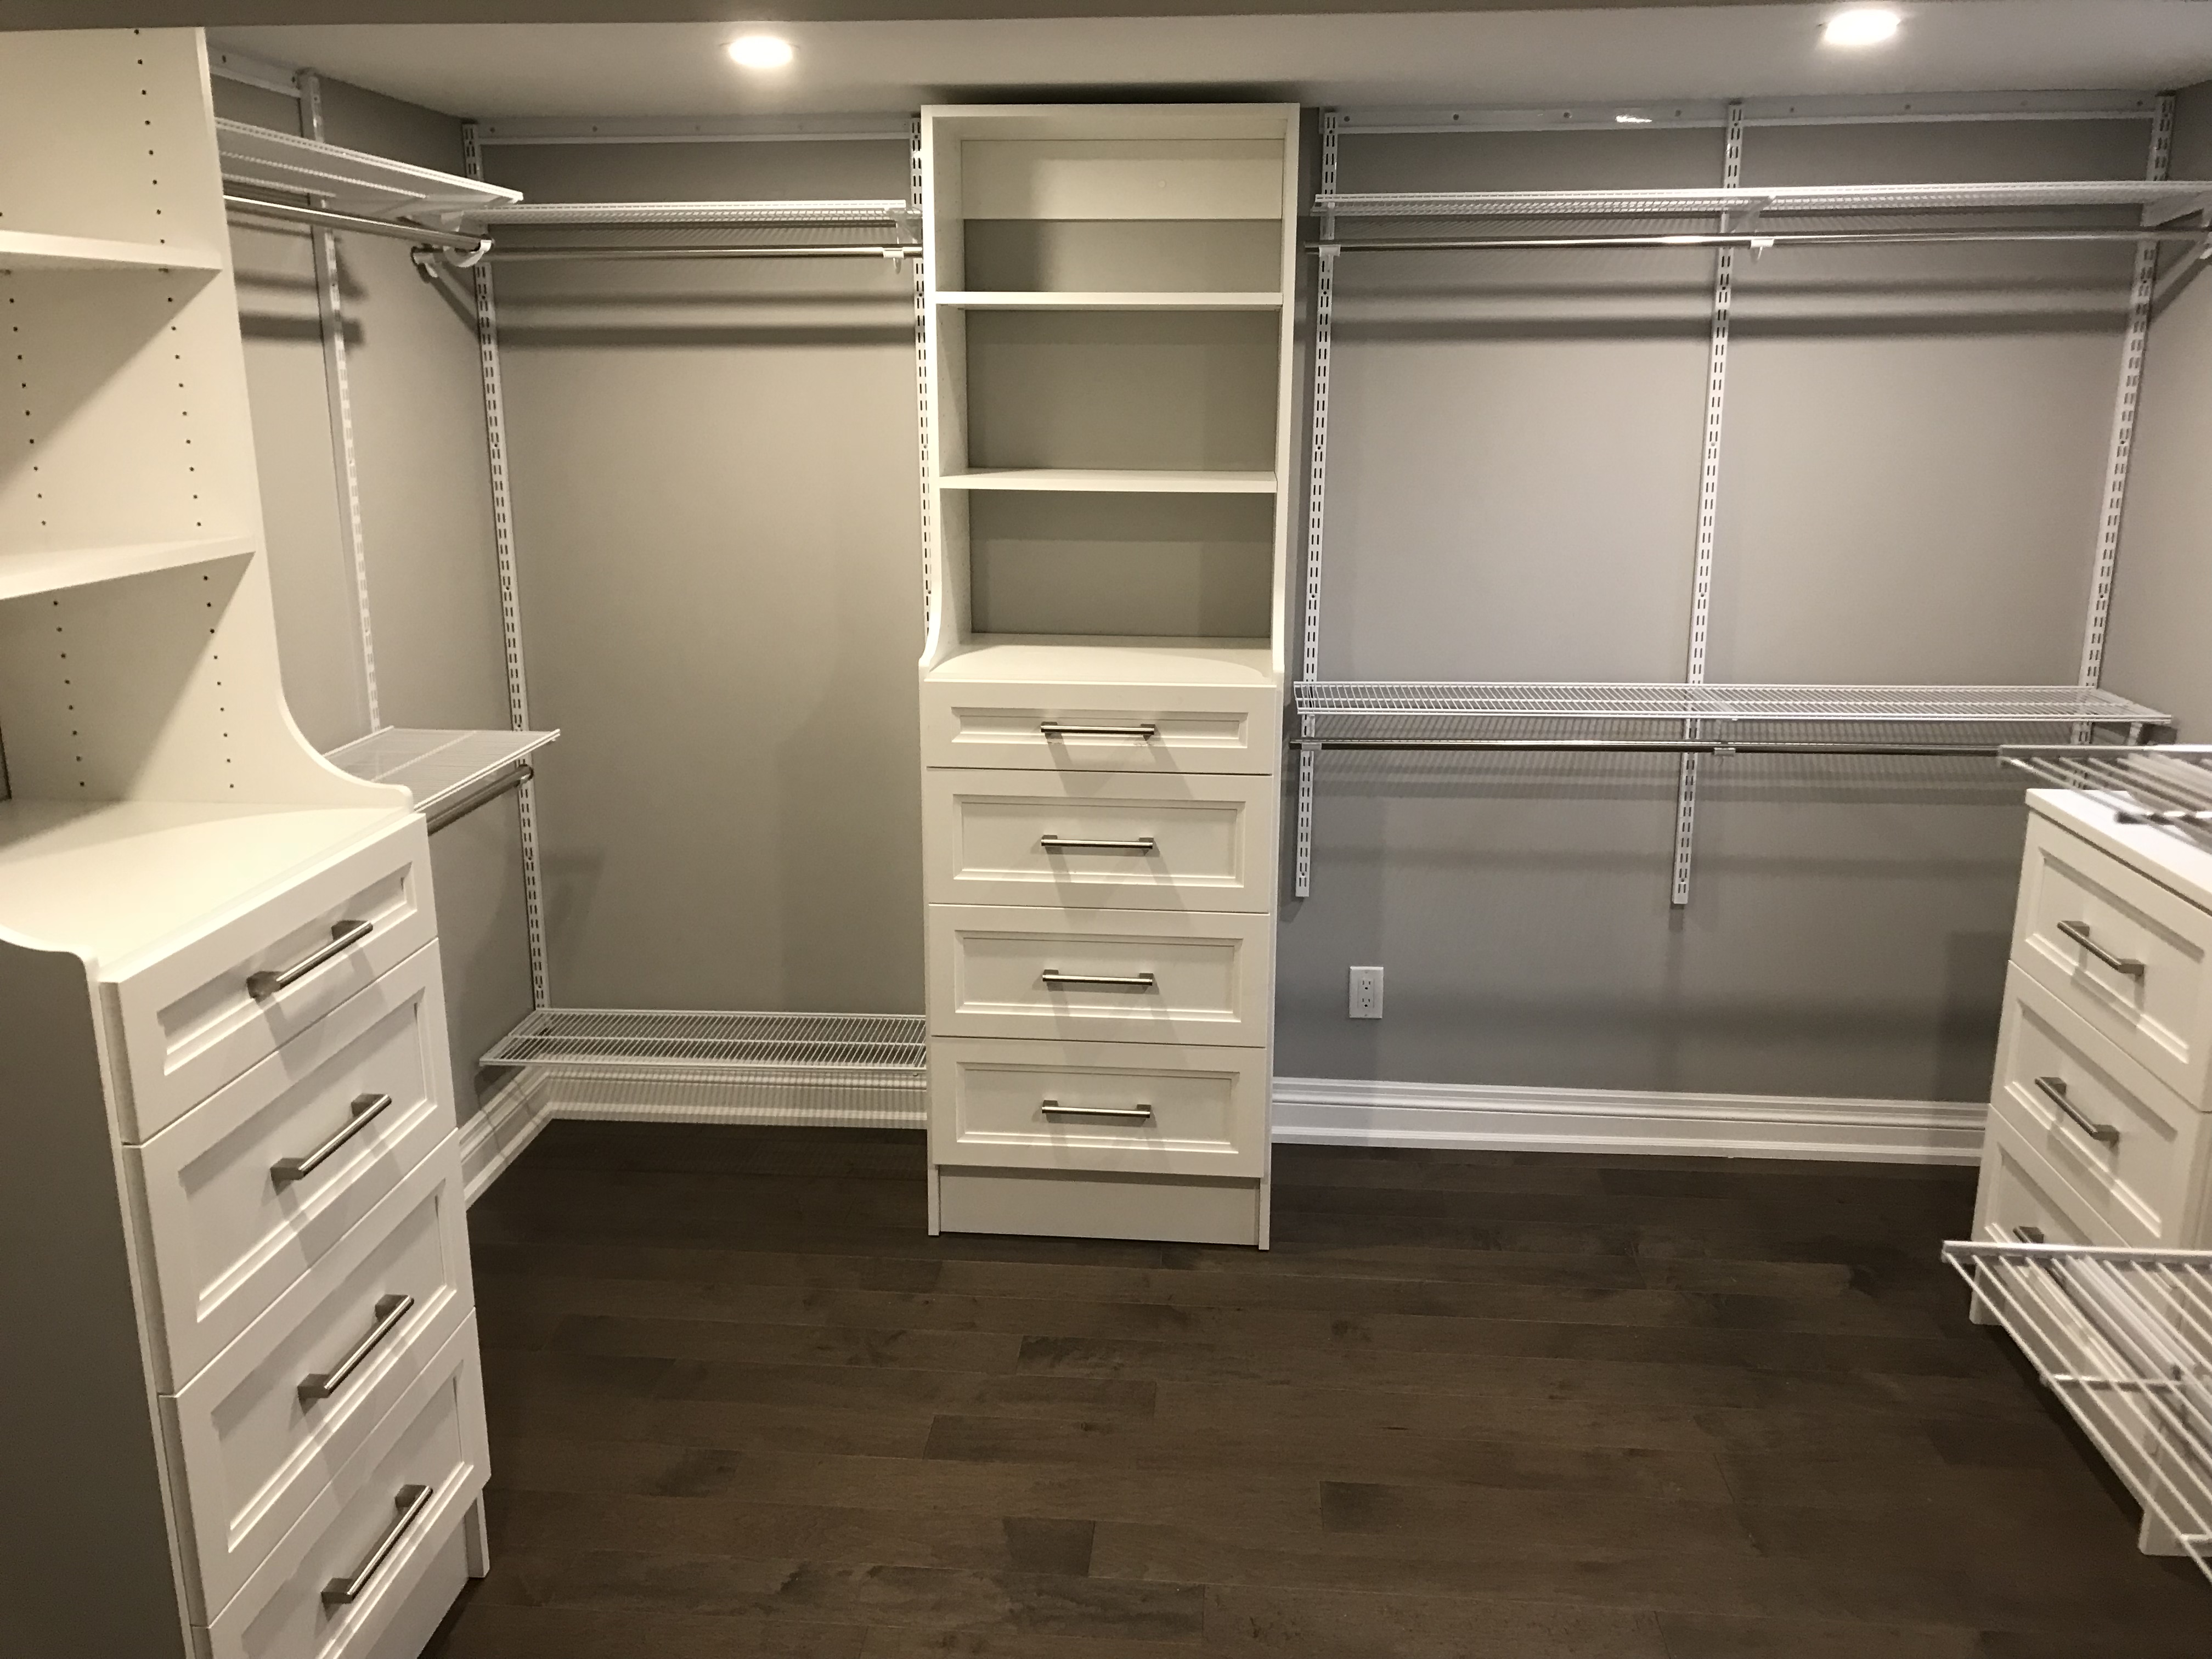 Closet Organizers in New Homes - Space Age Shelving